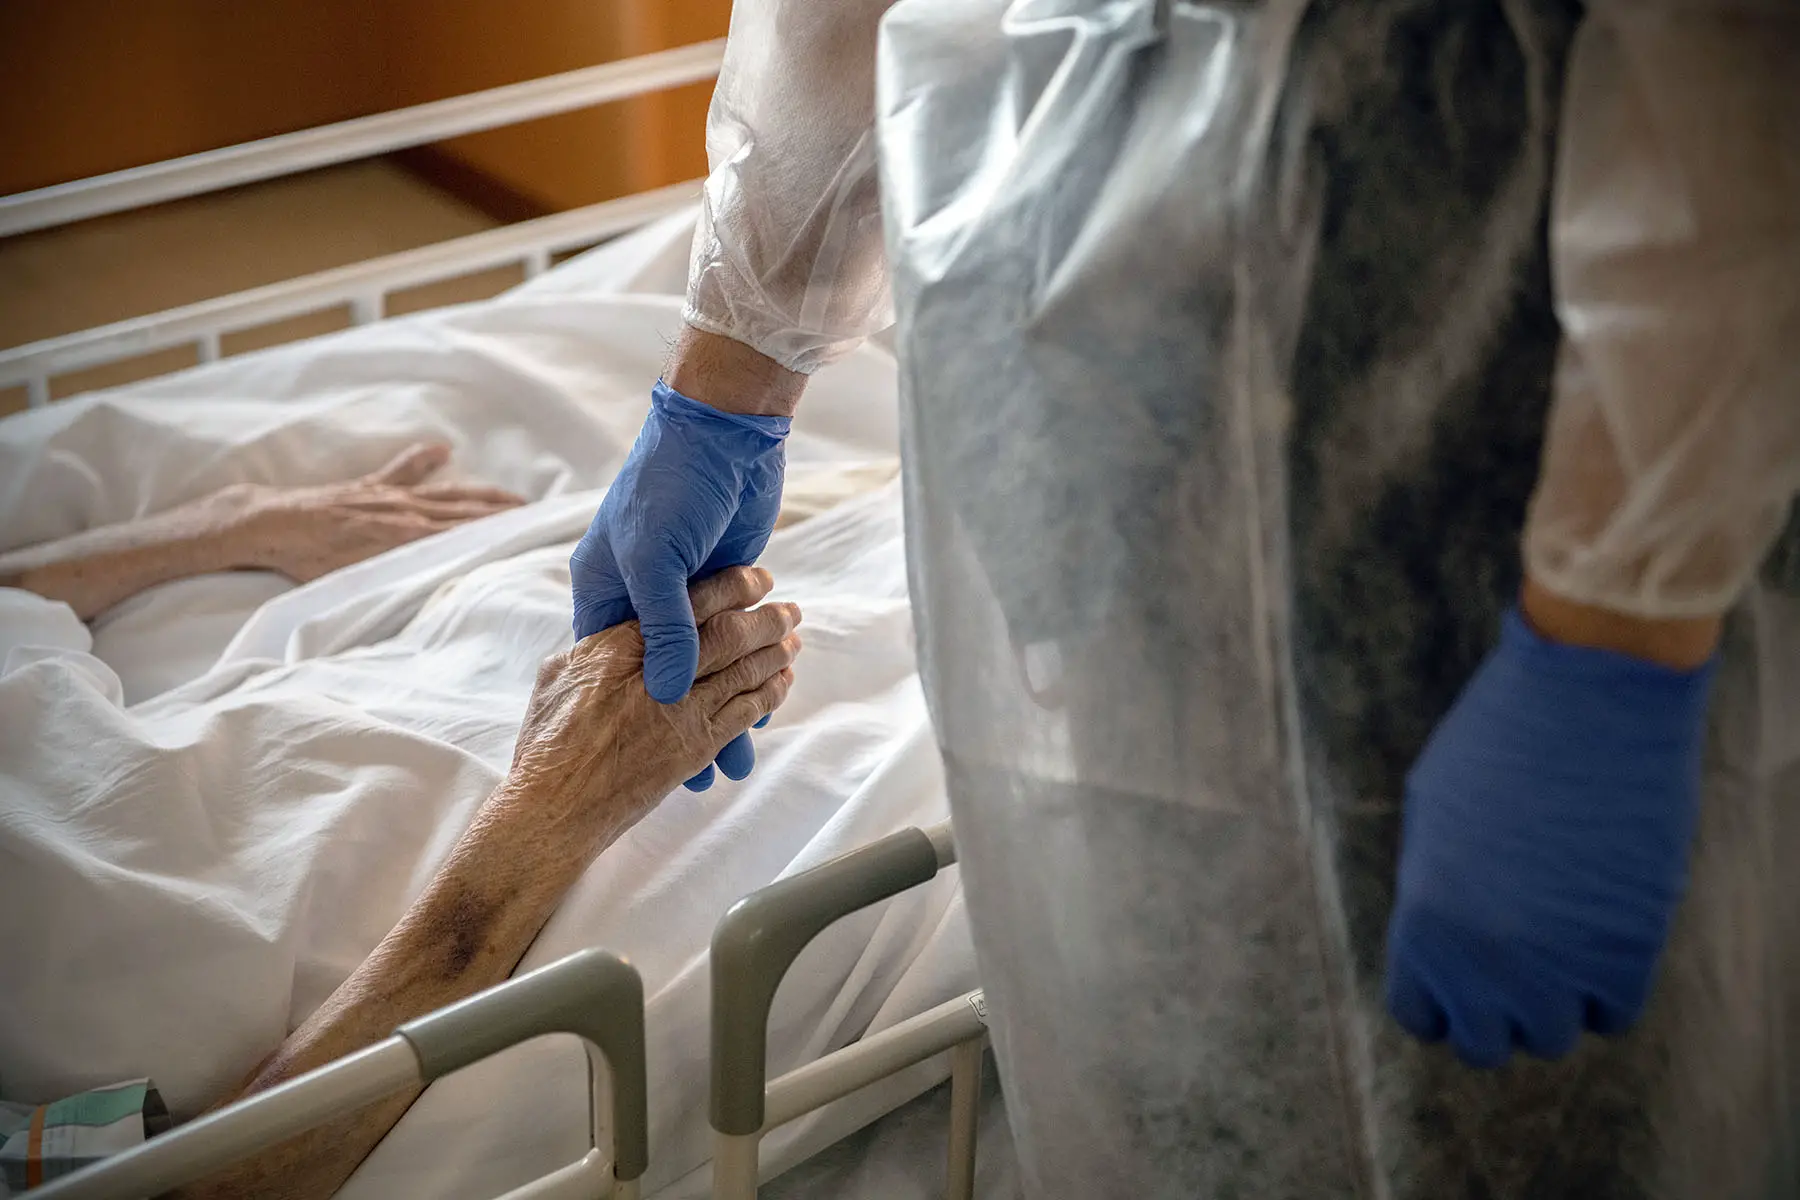 Old patient holding the gloved hand of a person standing by.